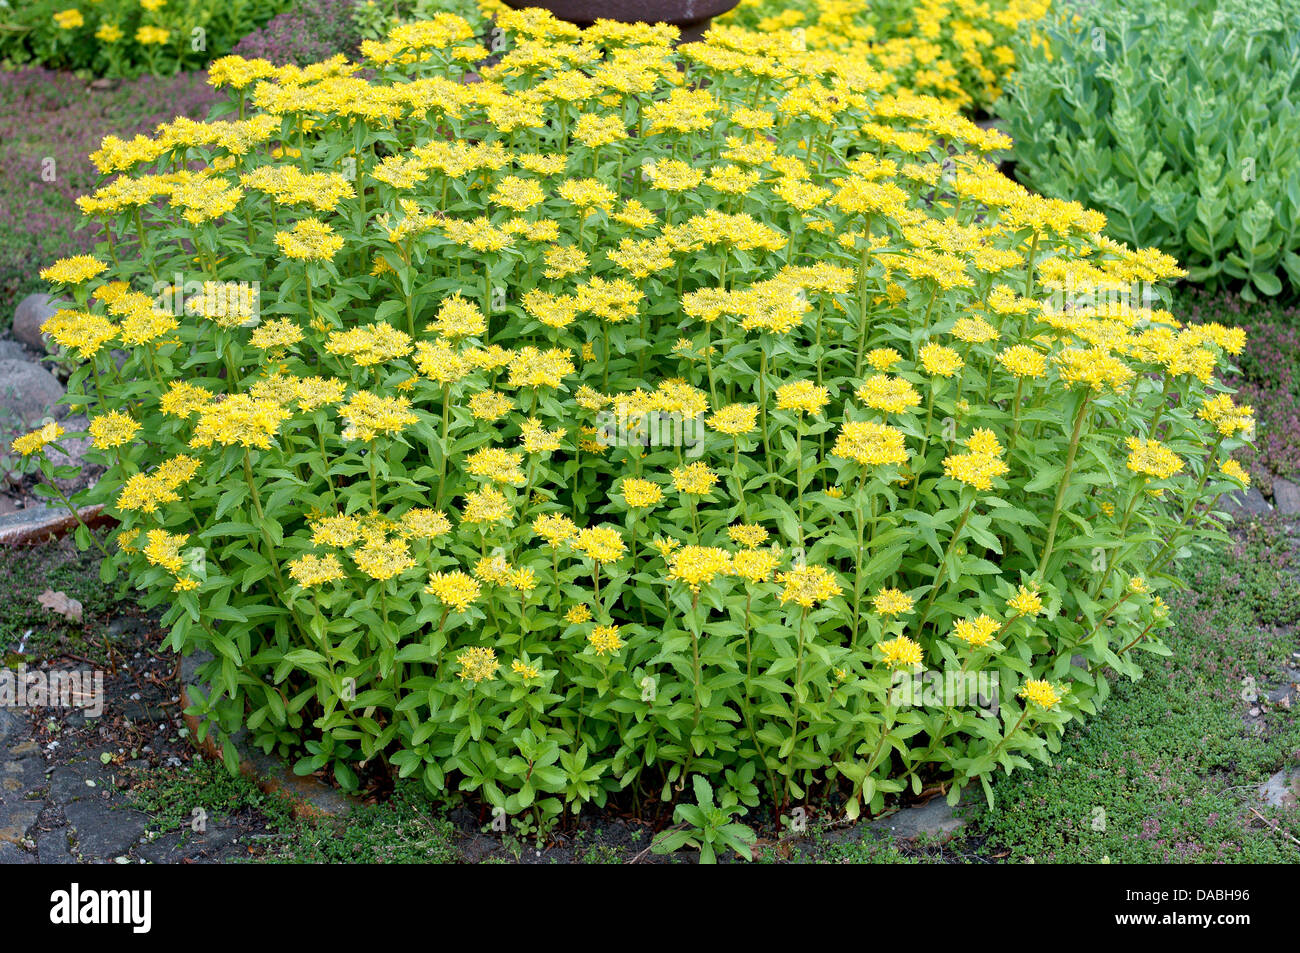 Stonecrop Bush In Full Bloom High Resolution Stock Photography And Images Alamy